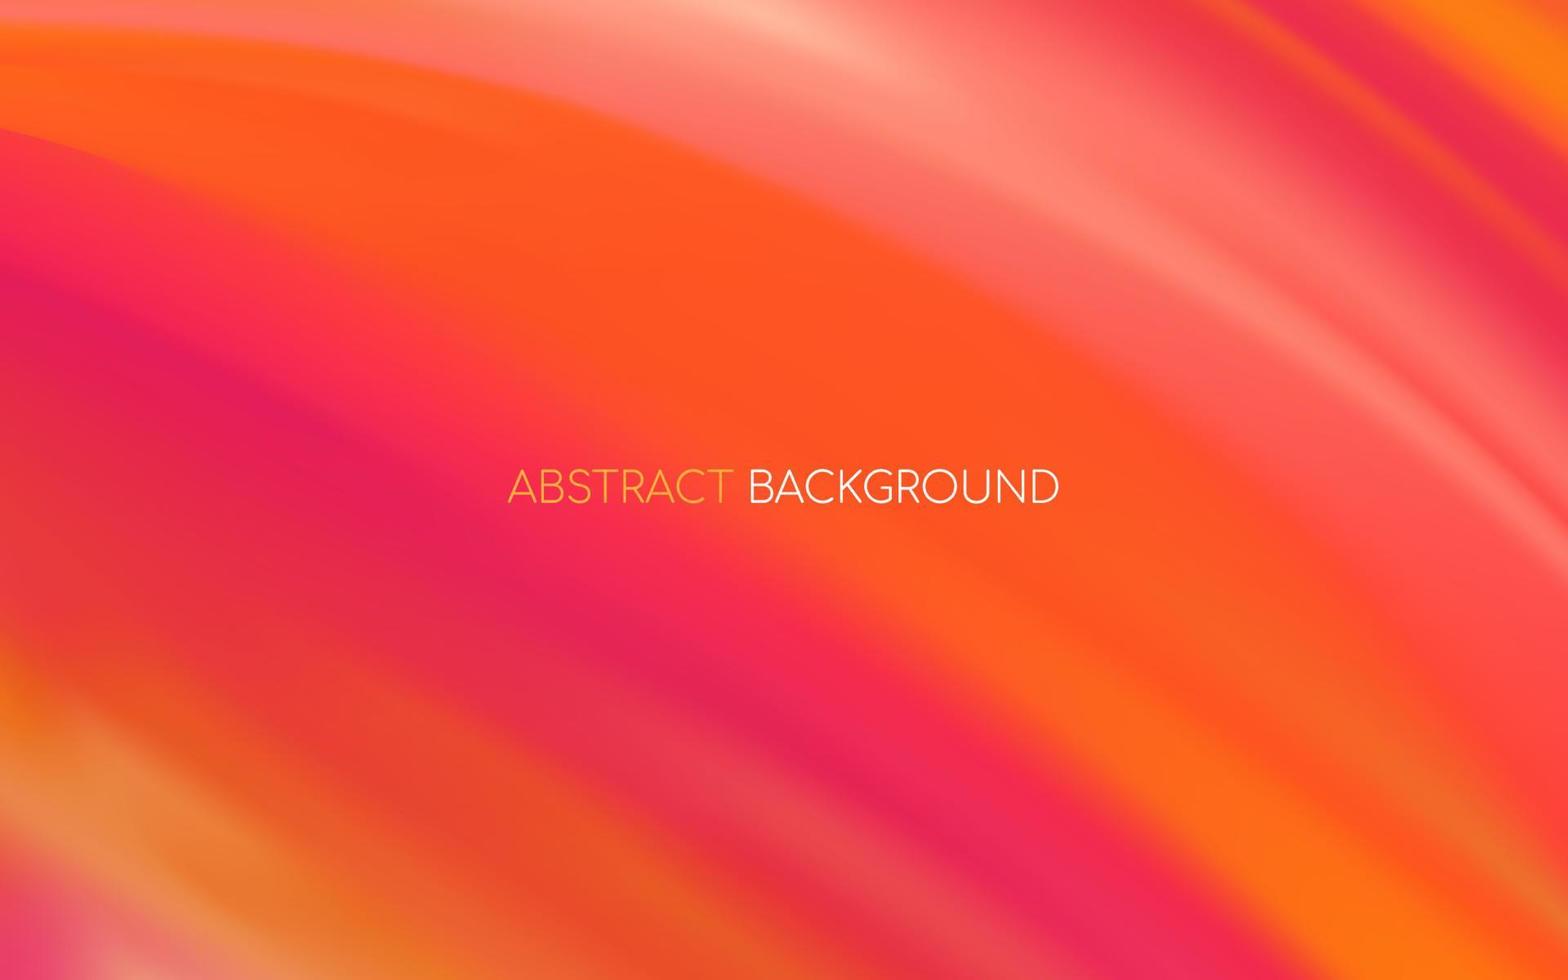 Abstract colorful fluid gradient landscape background with text, can be use for Cover, Flyer, Presentation, Advertising, Business, Banner, Backdrop, Website, Landing Page and Mobile Usage. vector